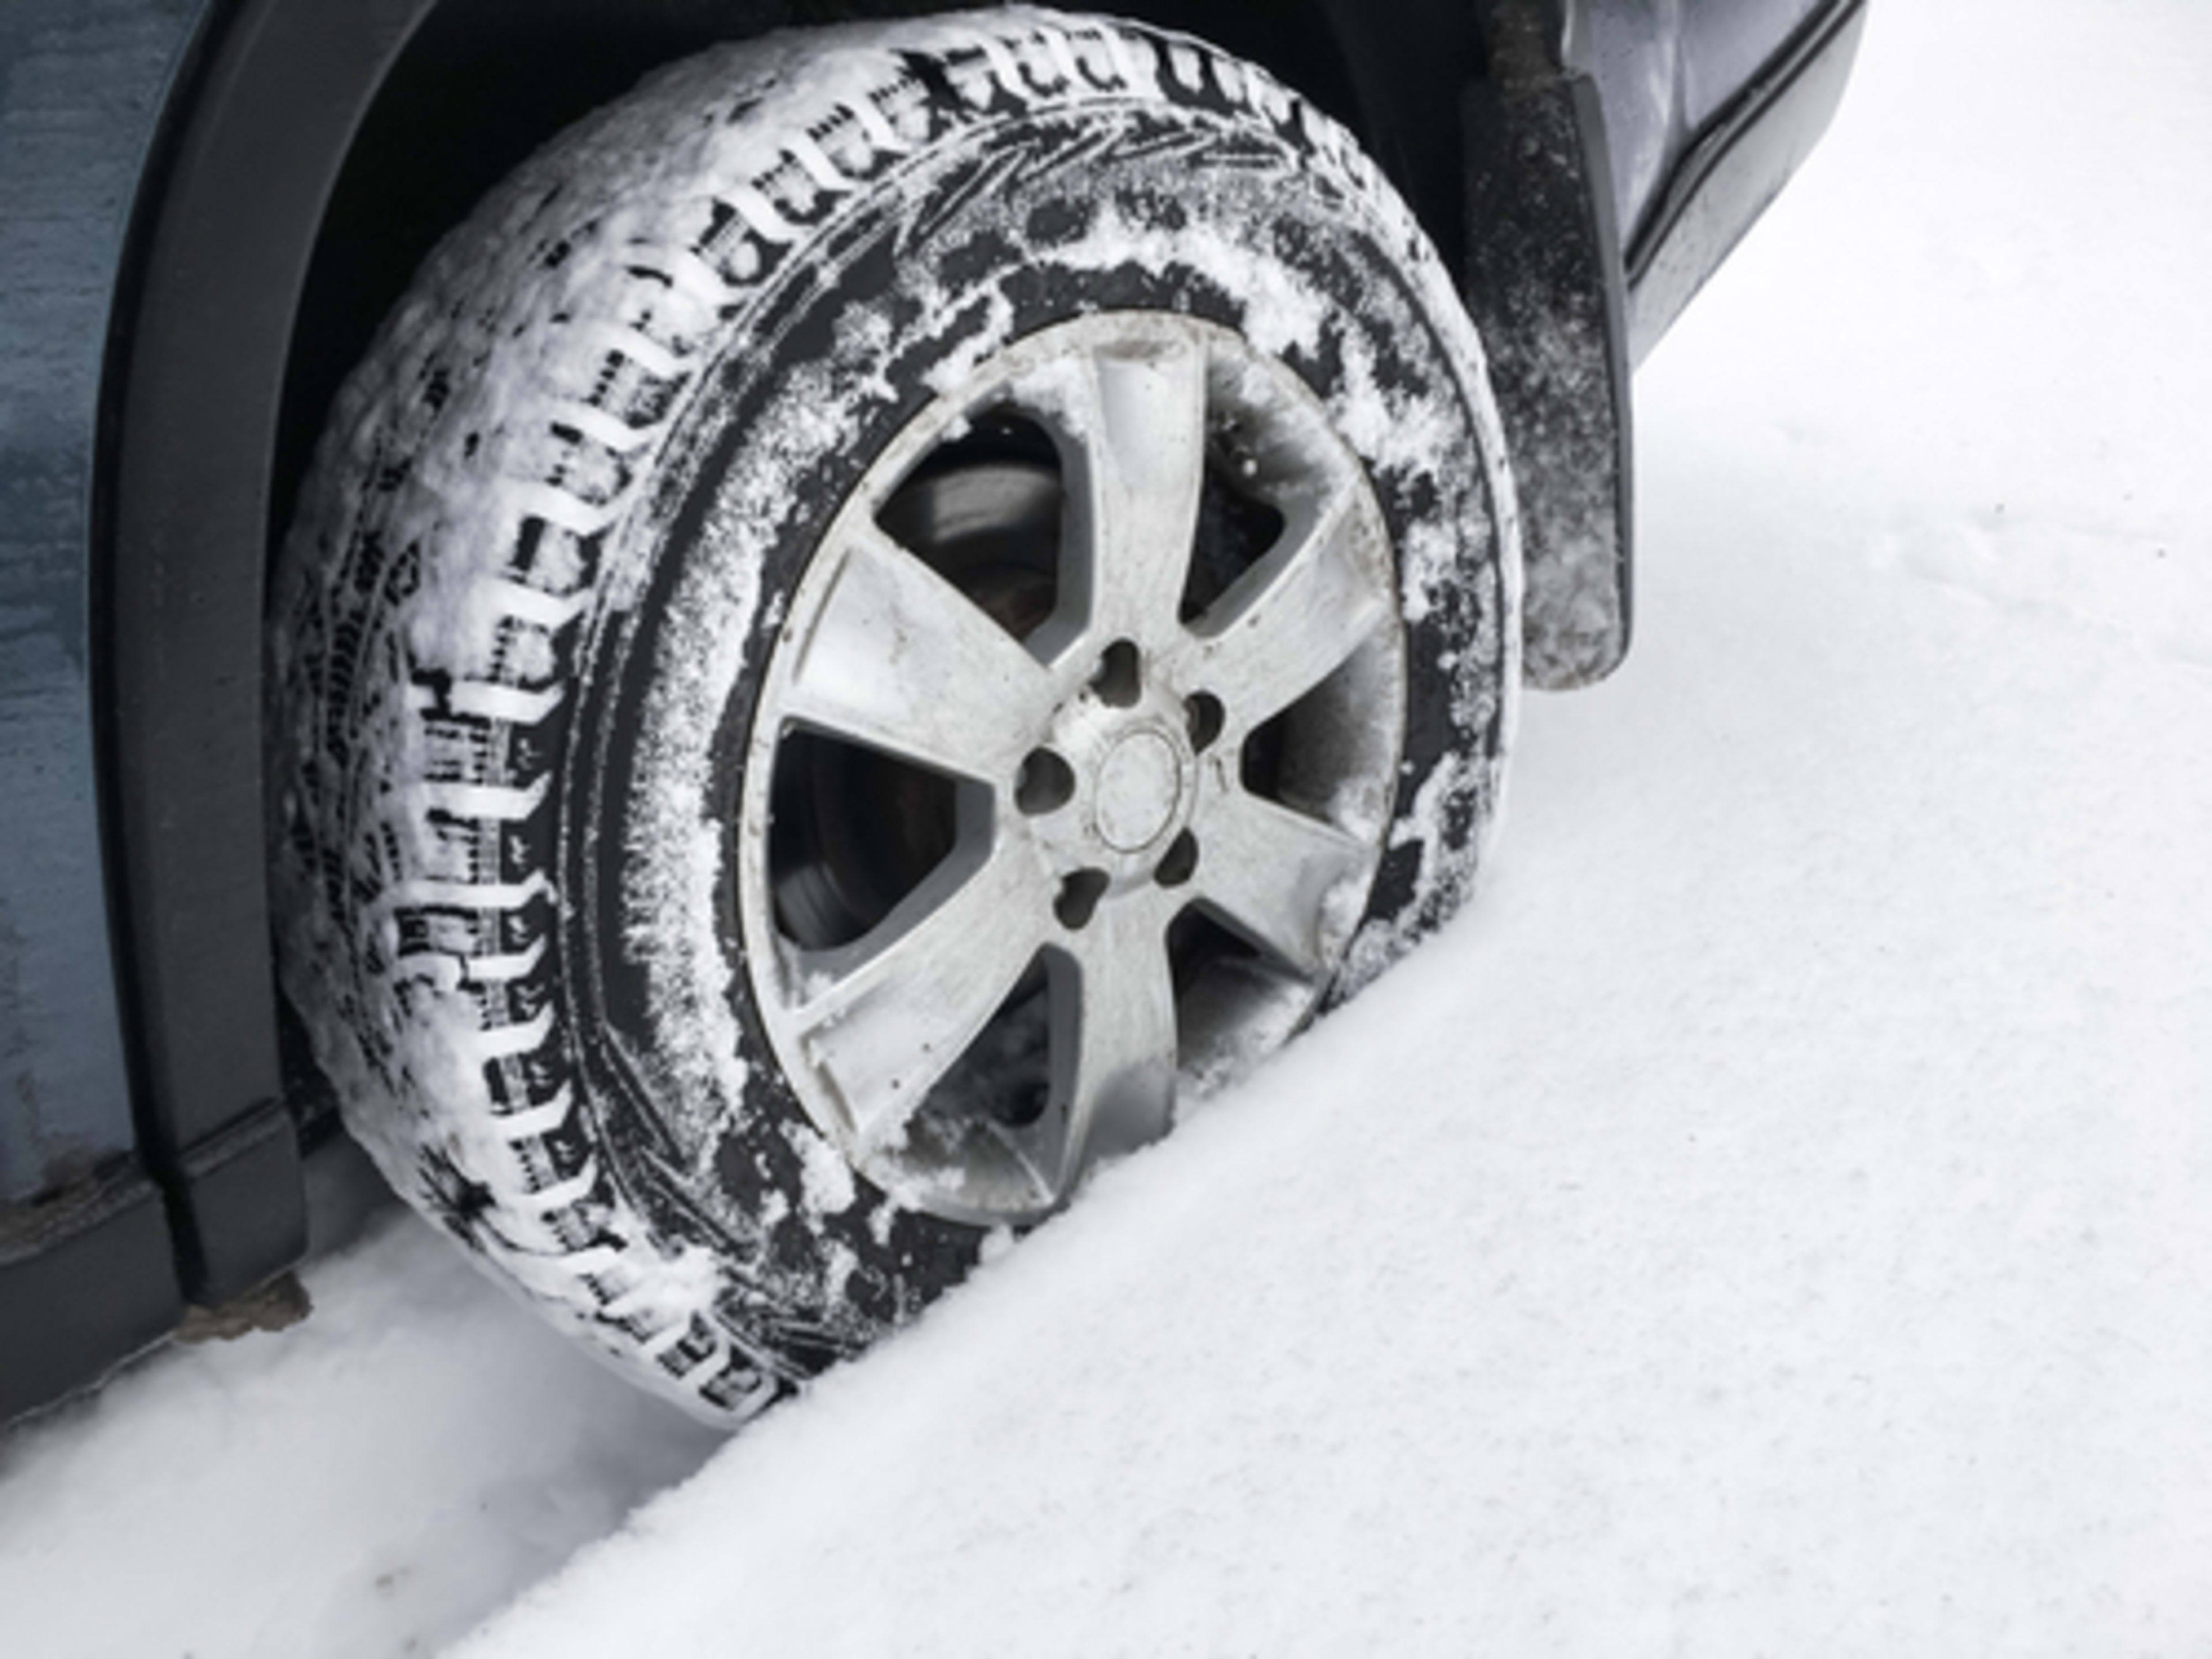 A snow covered winter tire and rim, driving through a few inches of snow.